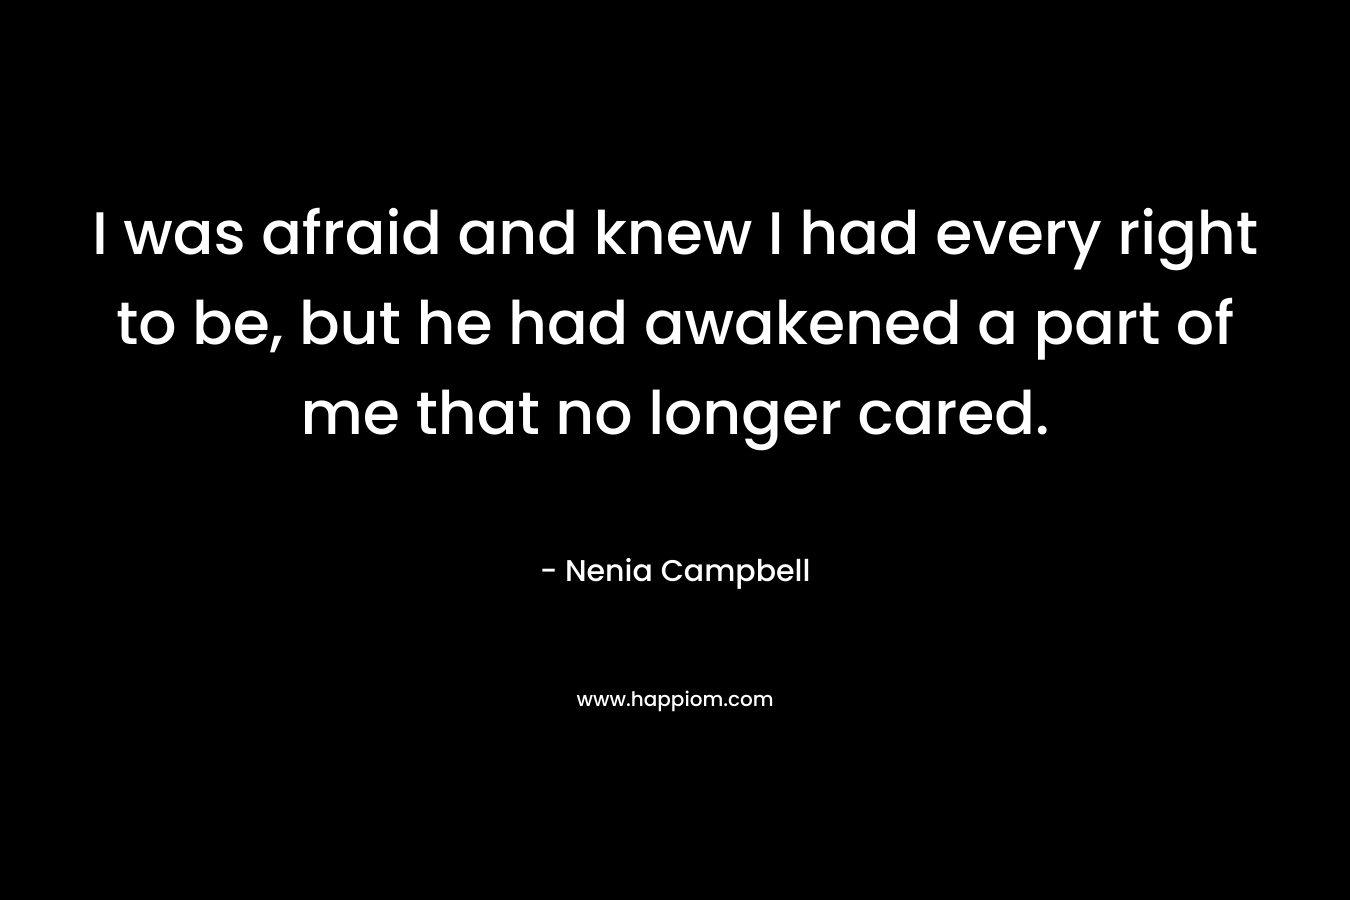 I was afraid and knew I had every right to be, but he had awakened a part of me that no longer cared. – Nenia Campbell